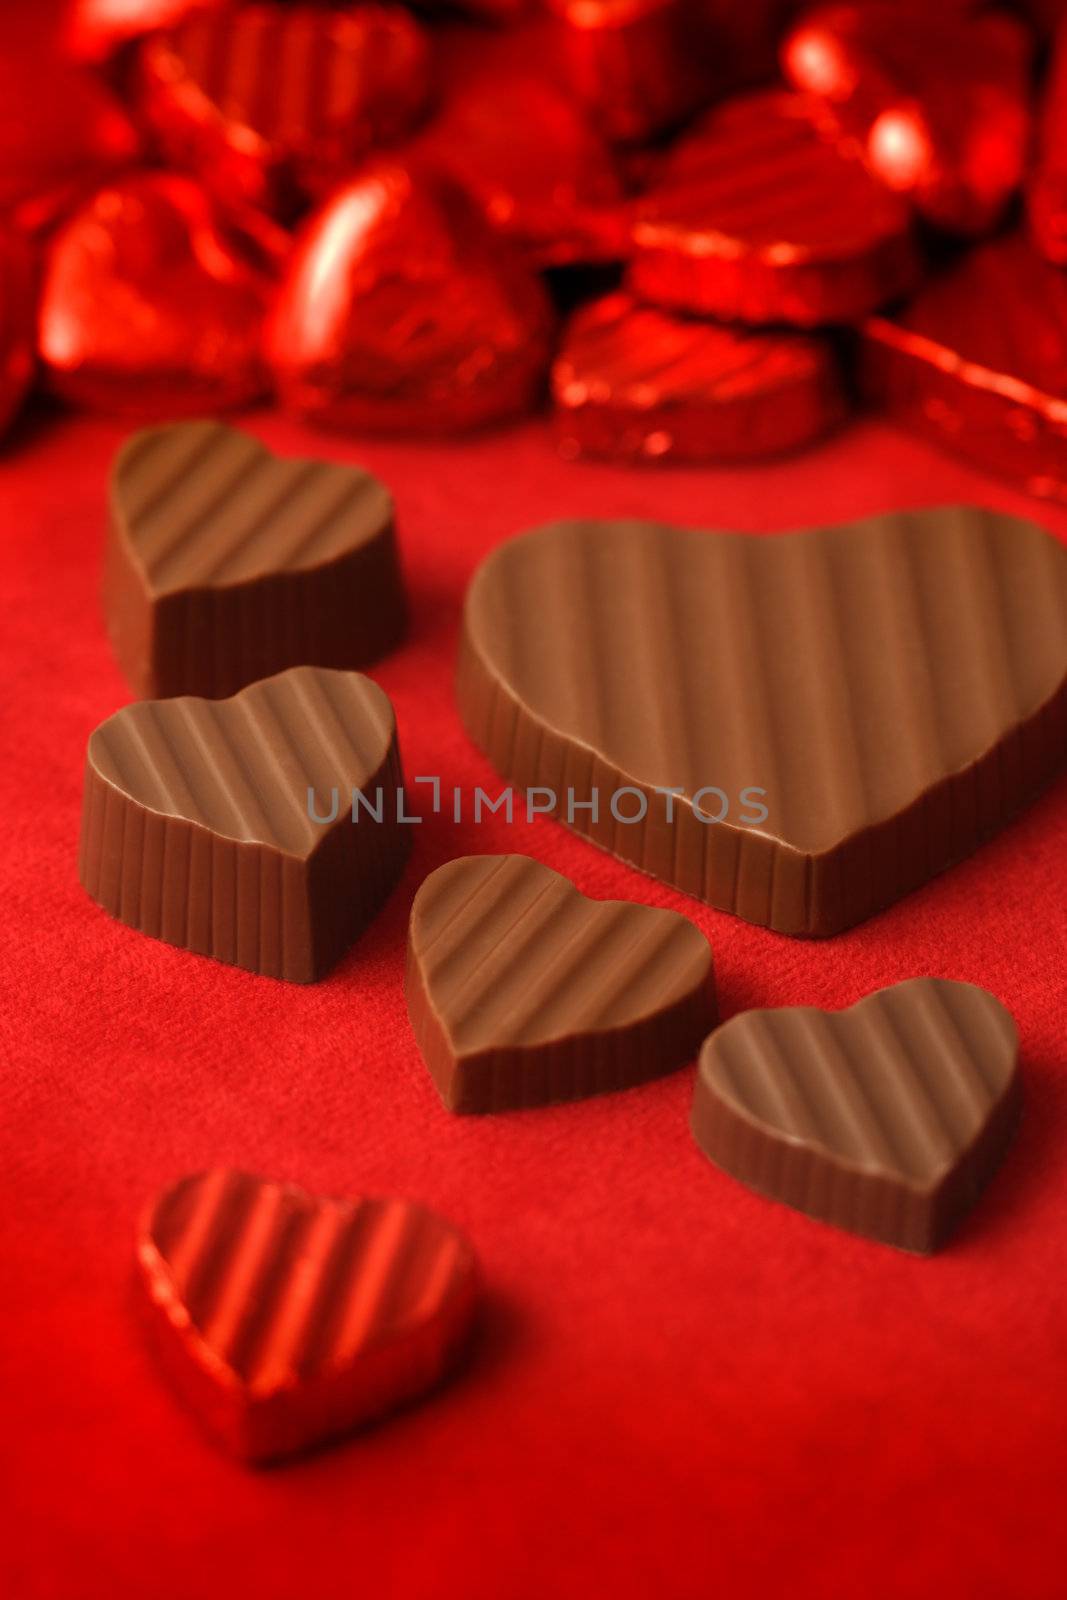 Delicious chocolates for Valentines day.  Shallow depth of field - focus through the middle of image.
